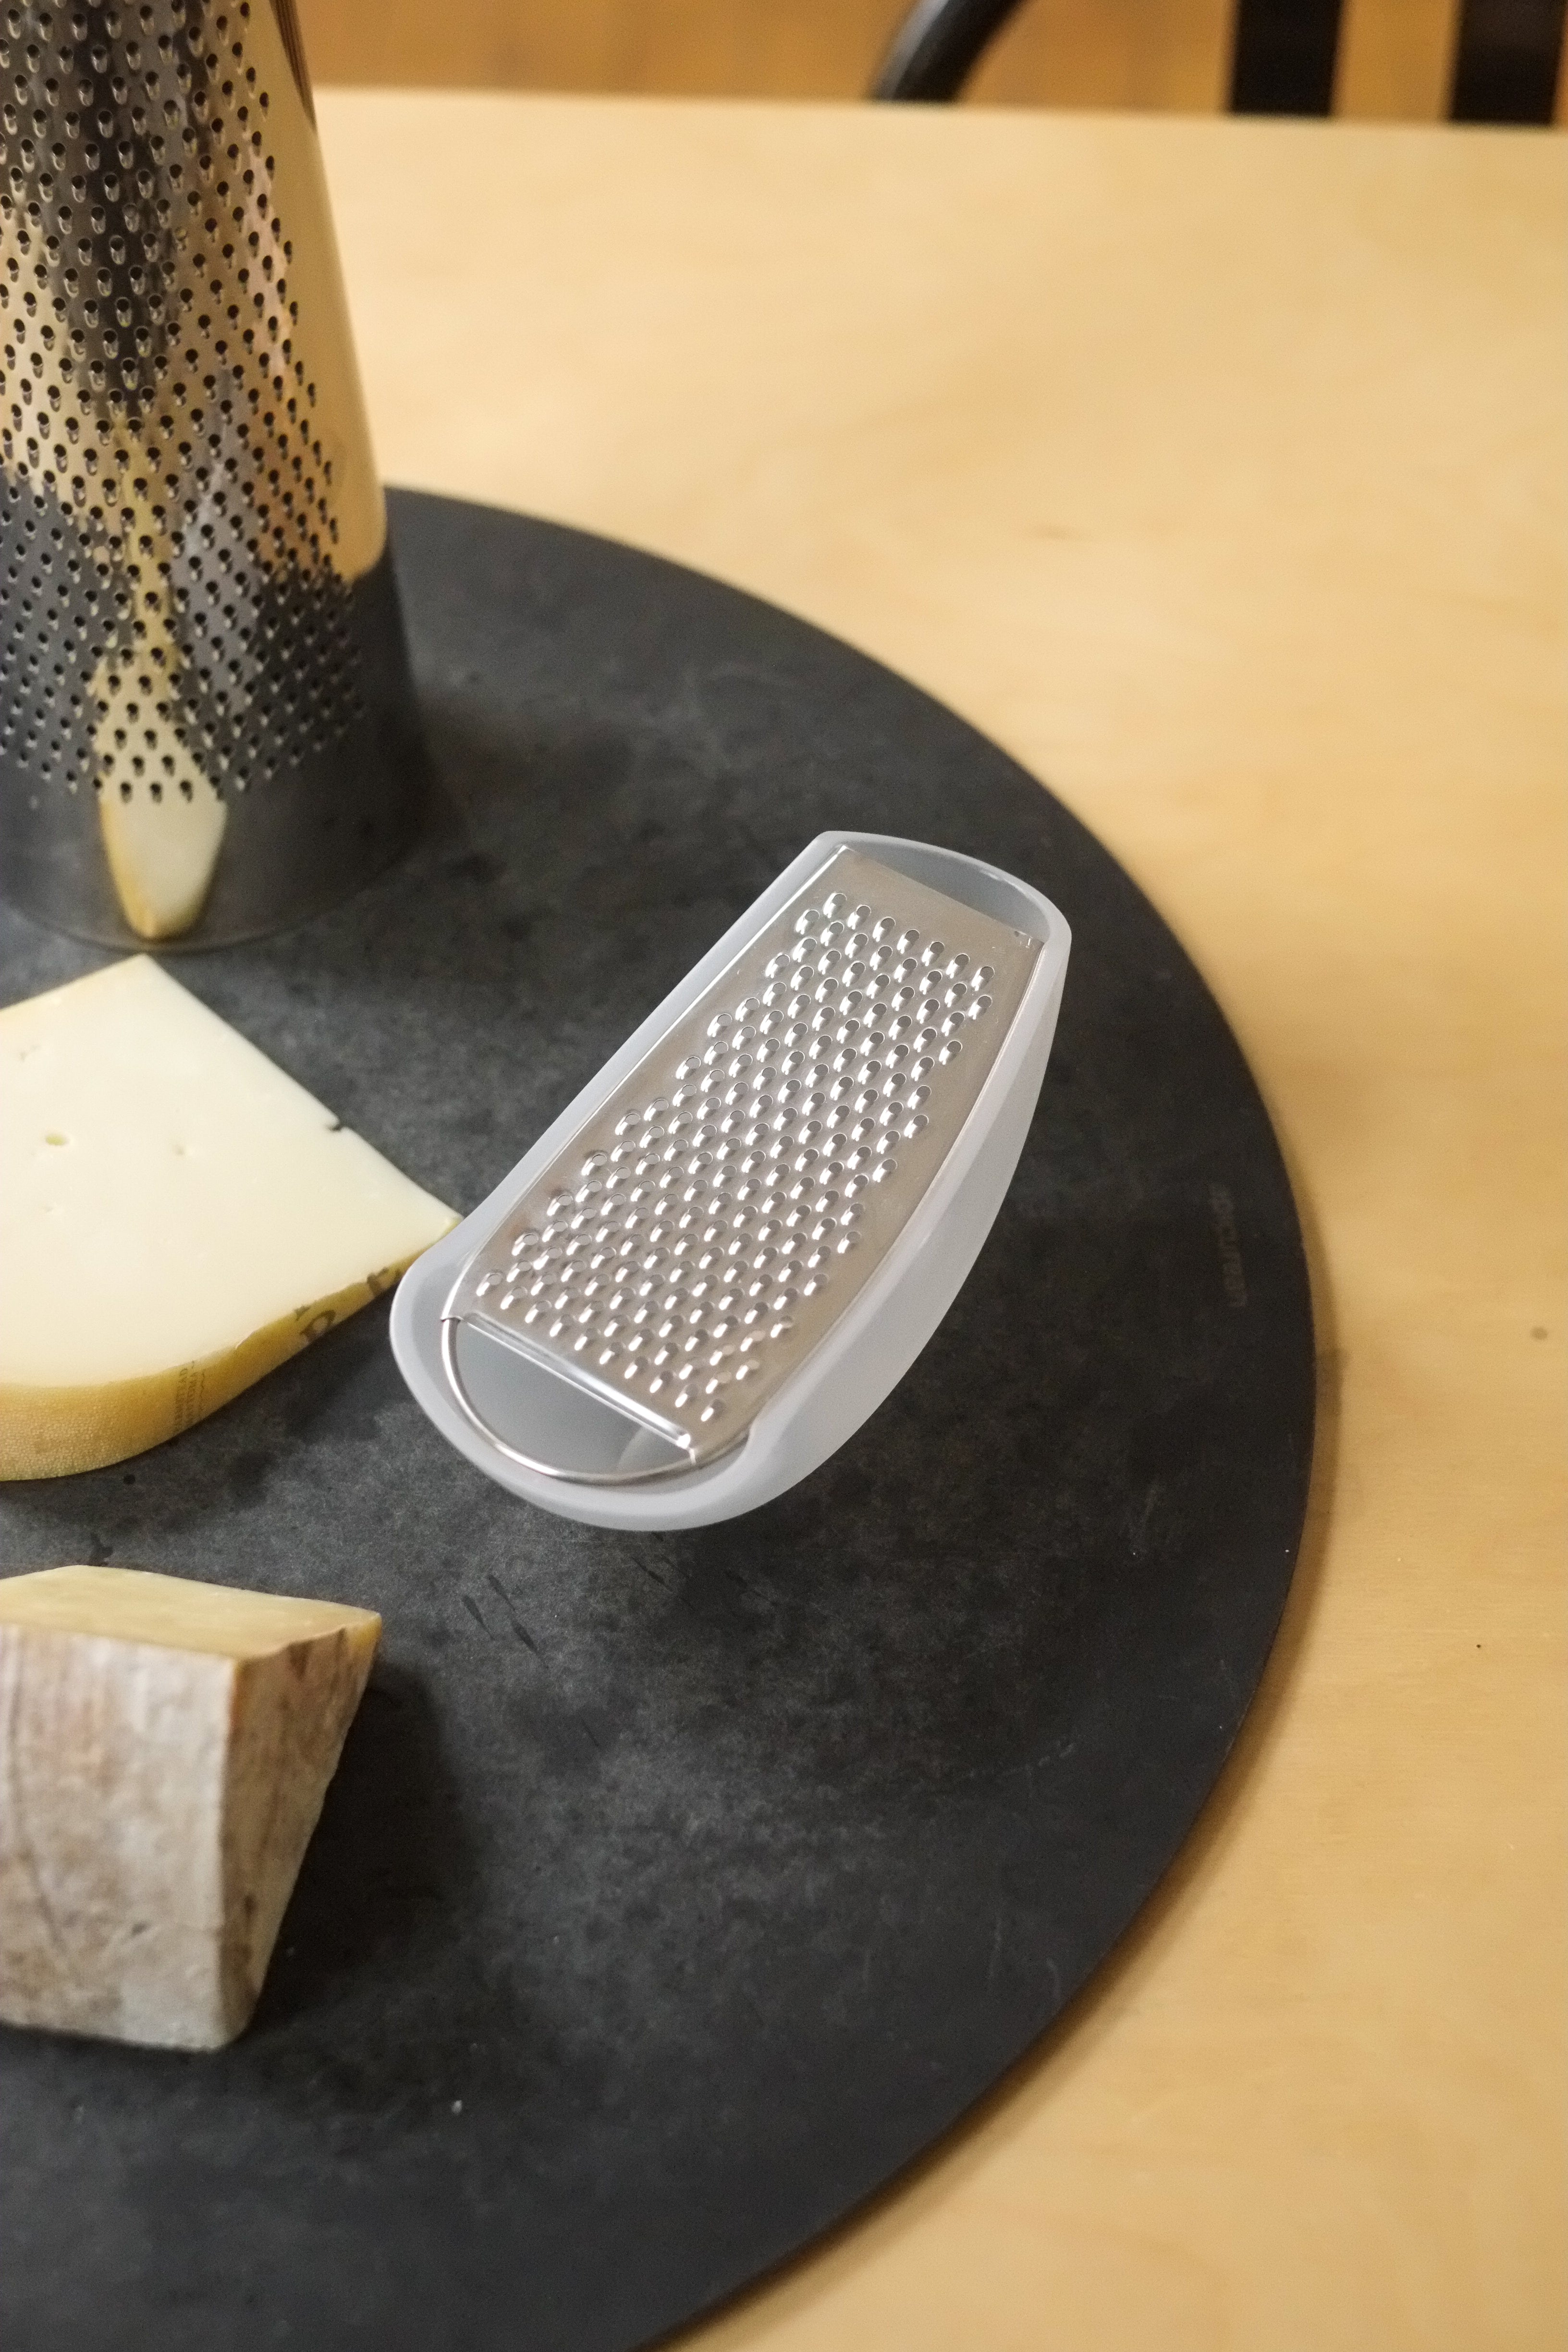 Wooden Table Parmesan Grater: buy it now